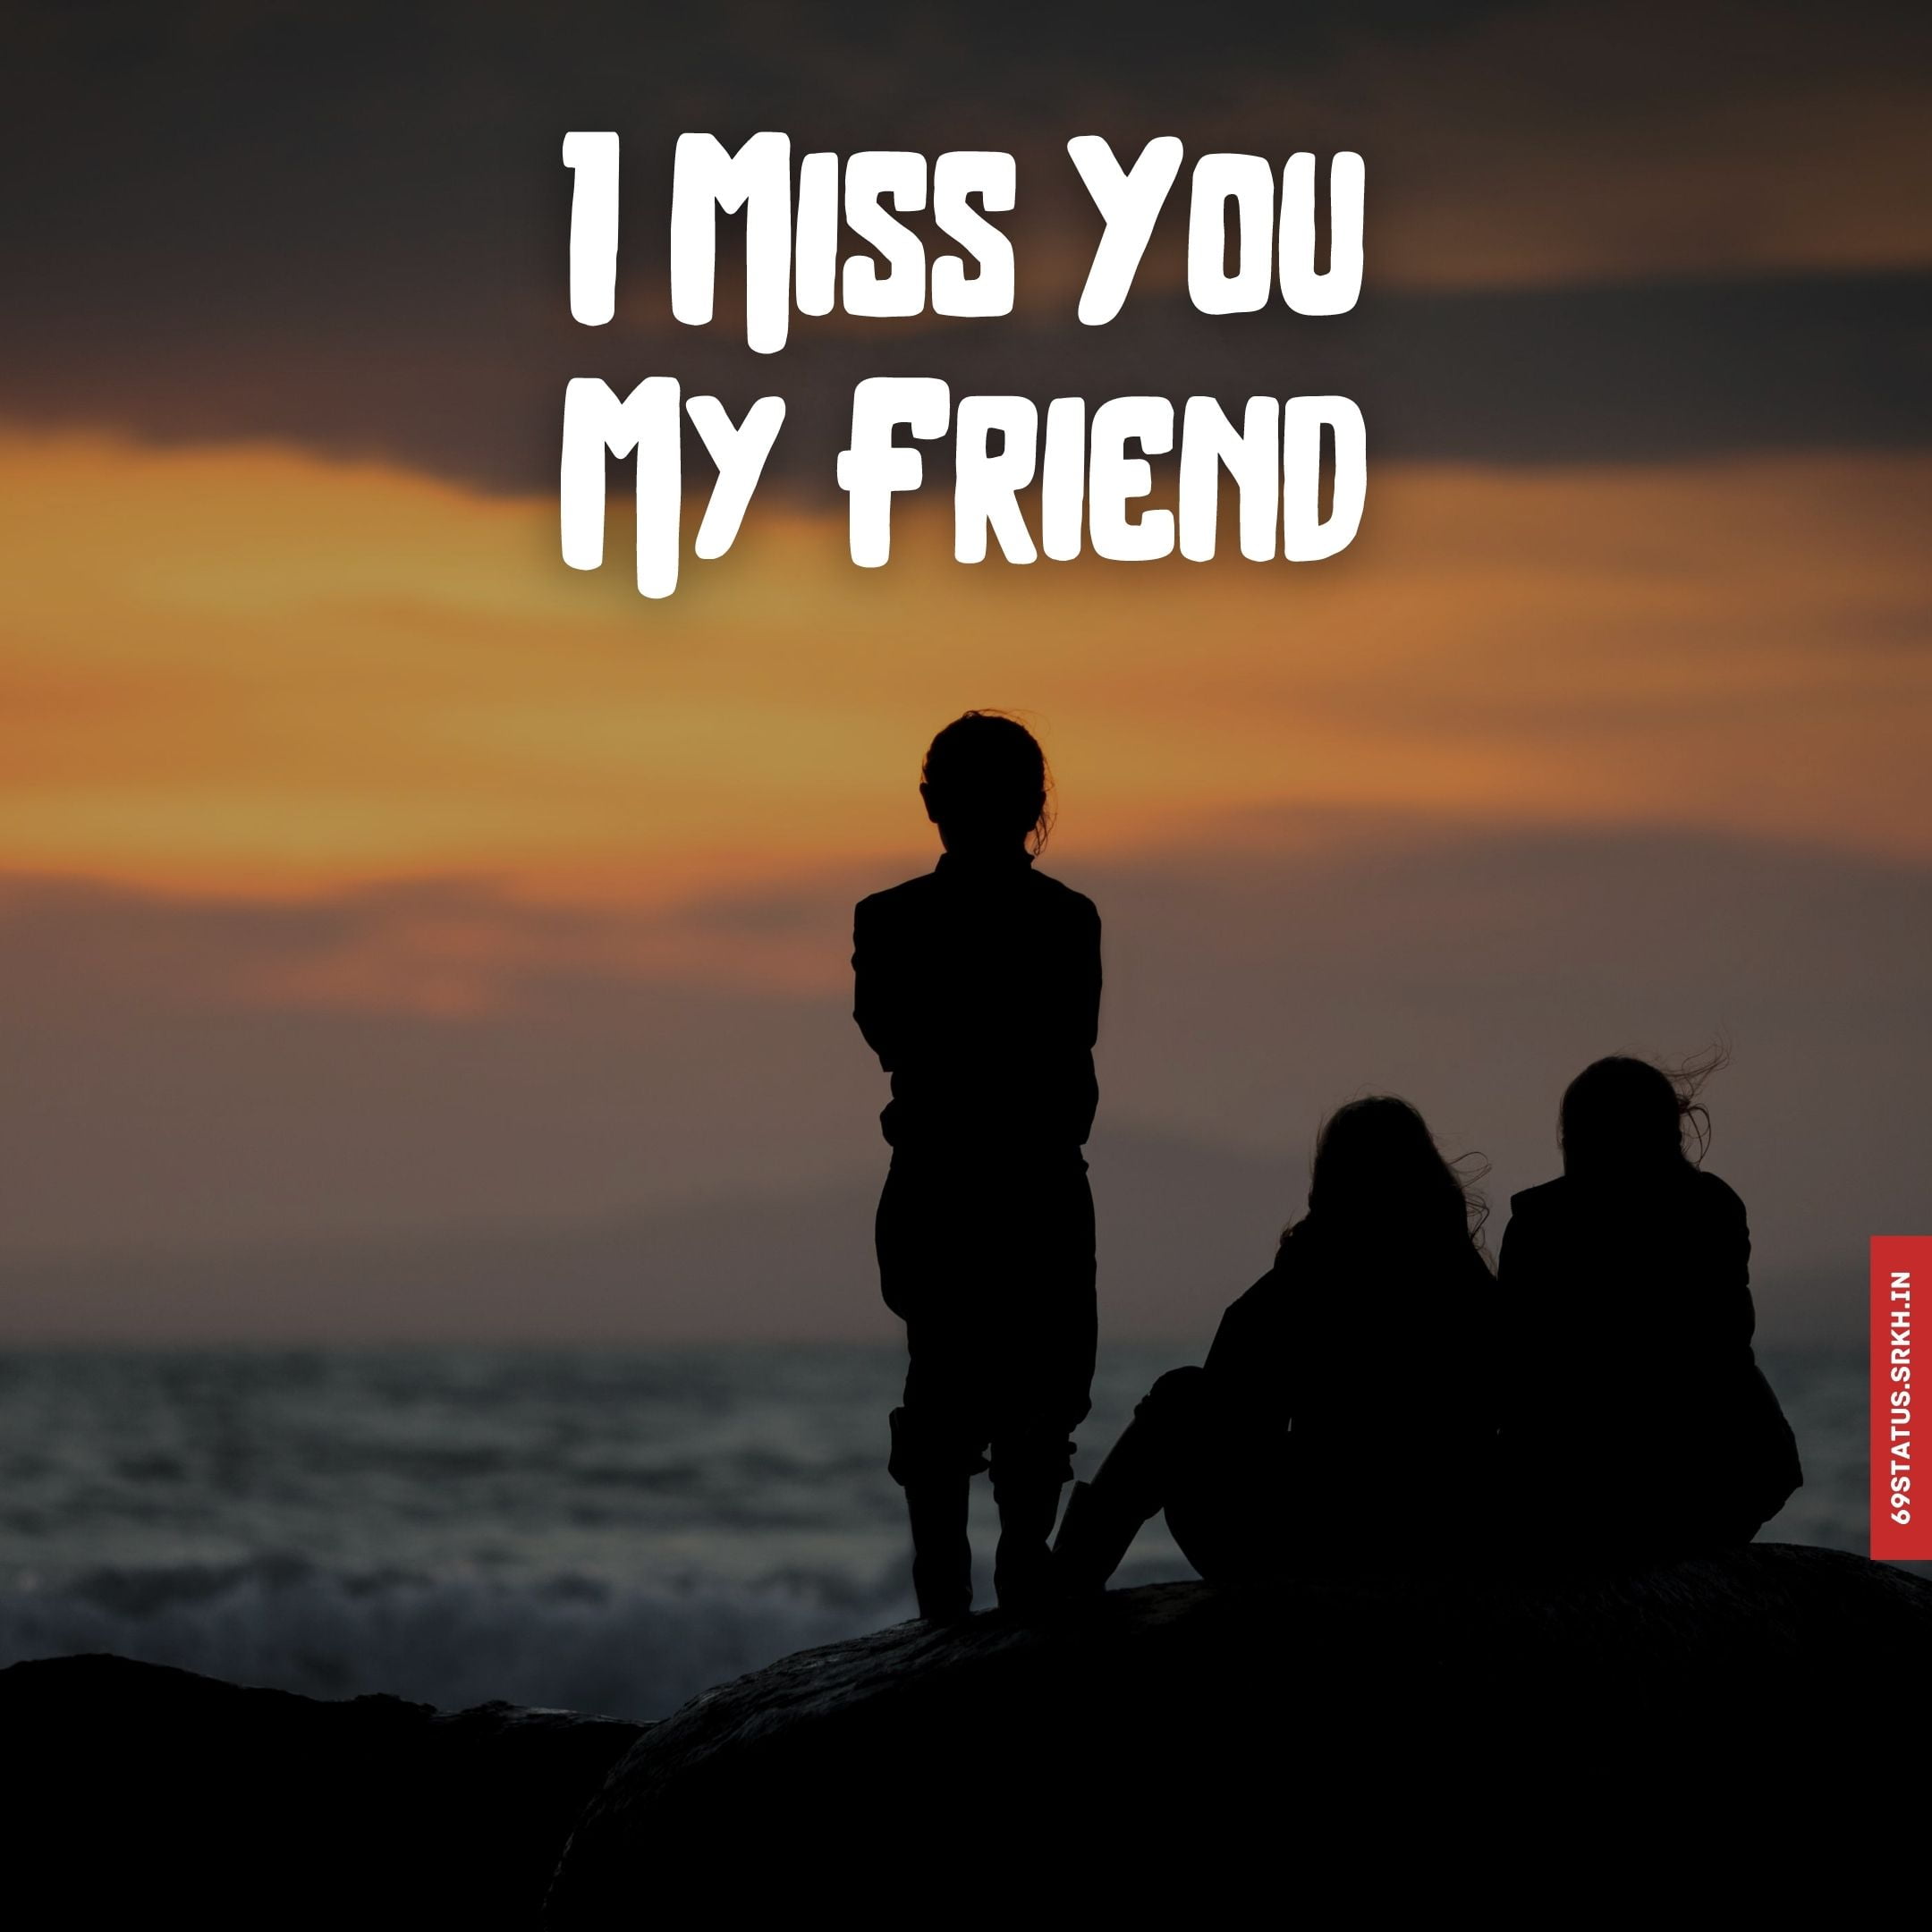 🔥 I miss you friend images in full hd Download free - Images SRkh